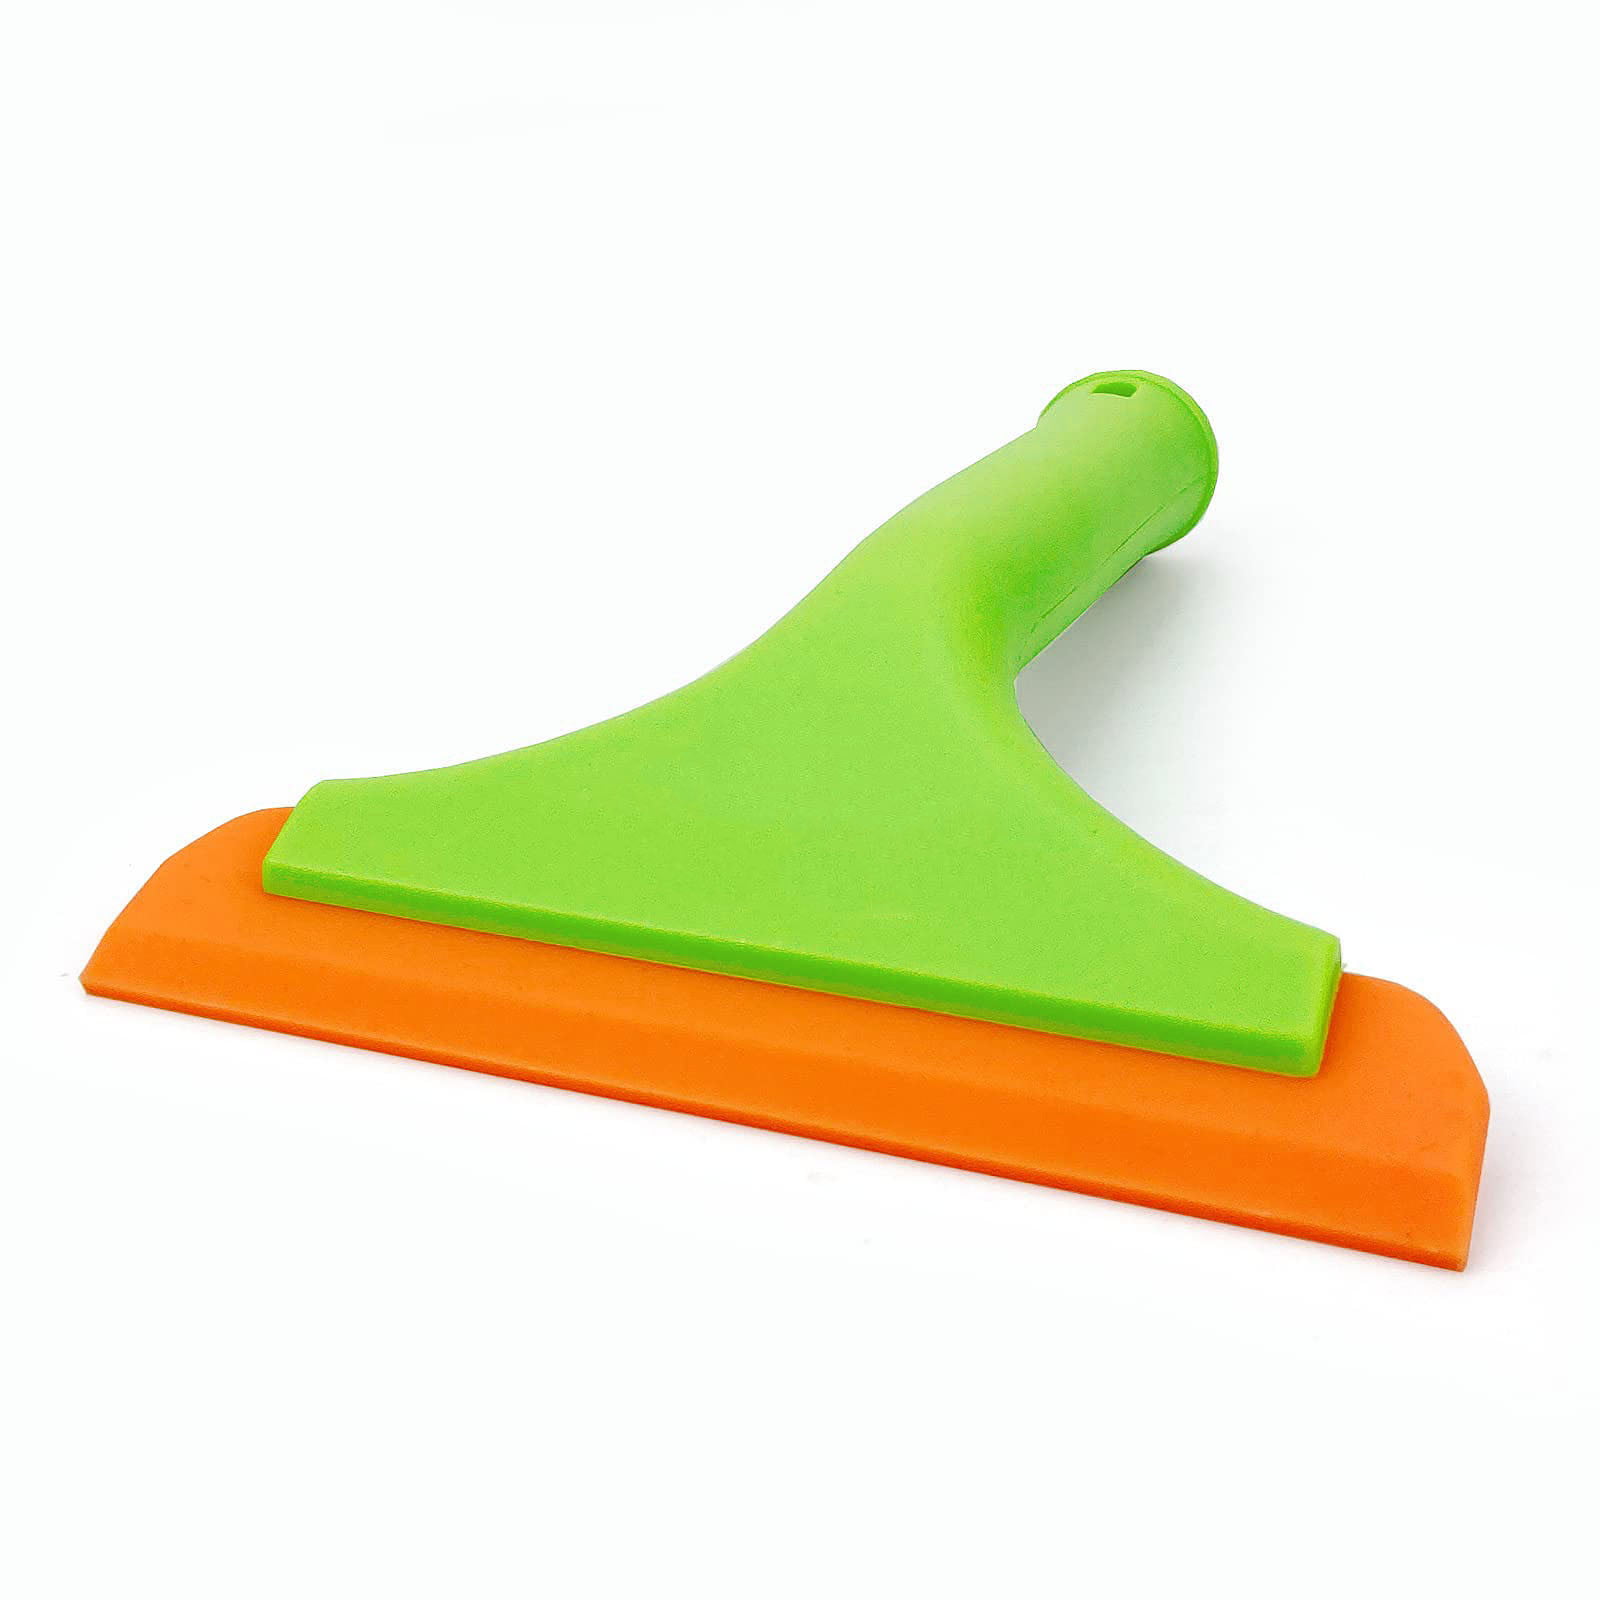 lafoxla 4PCS Small Silicone Squeegee, Squeegee for Car Windows Shower Glass  Door Mirrors Car Windshield, Auto Water Blade Squeegee Wind